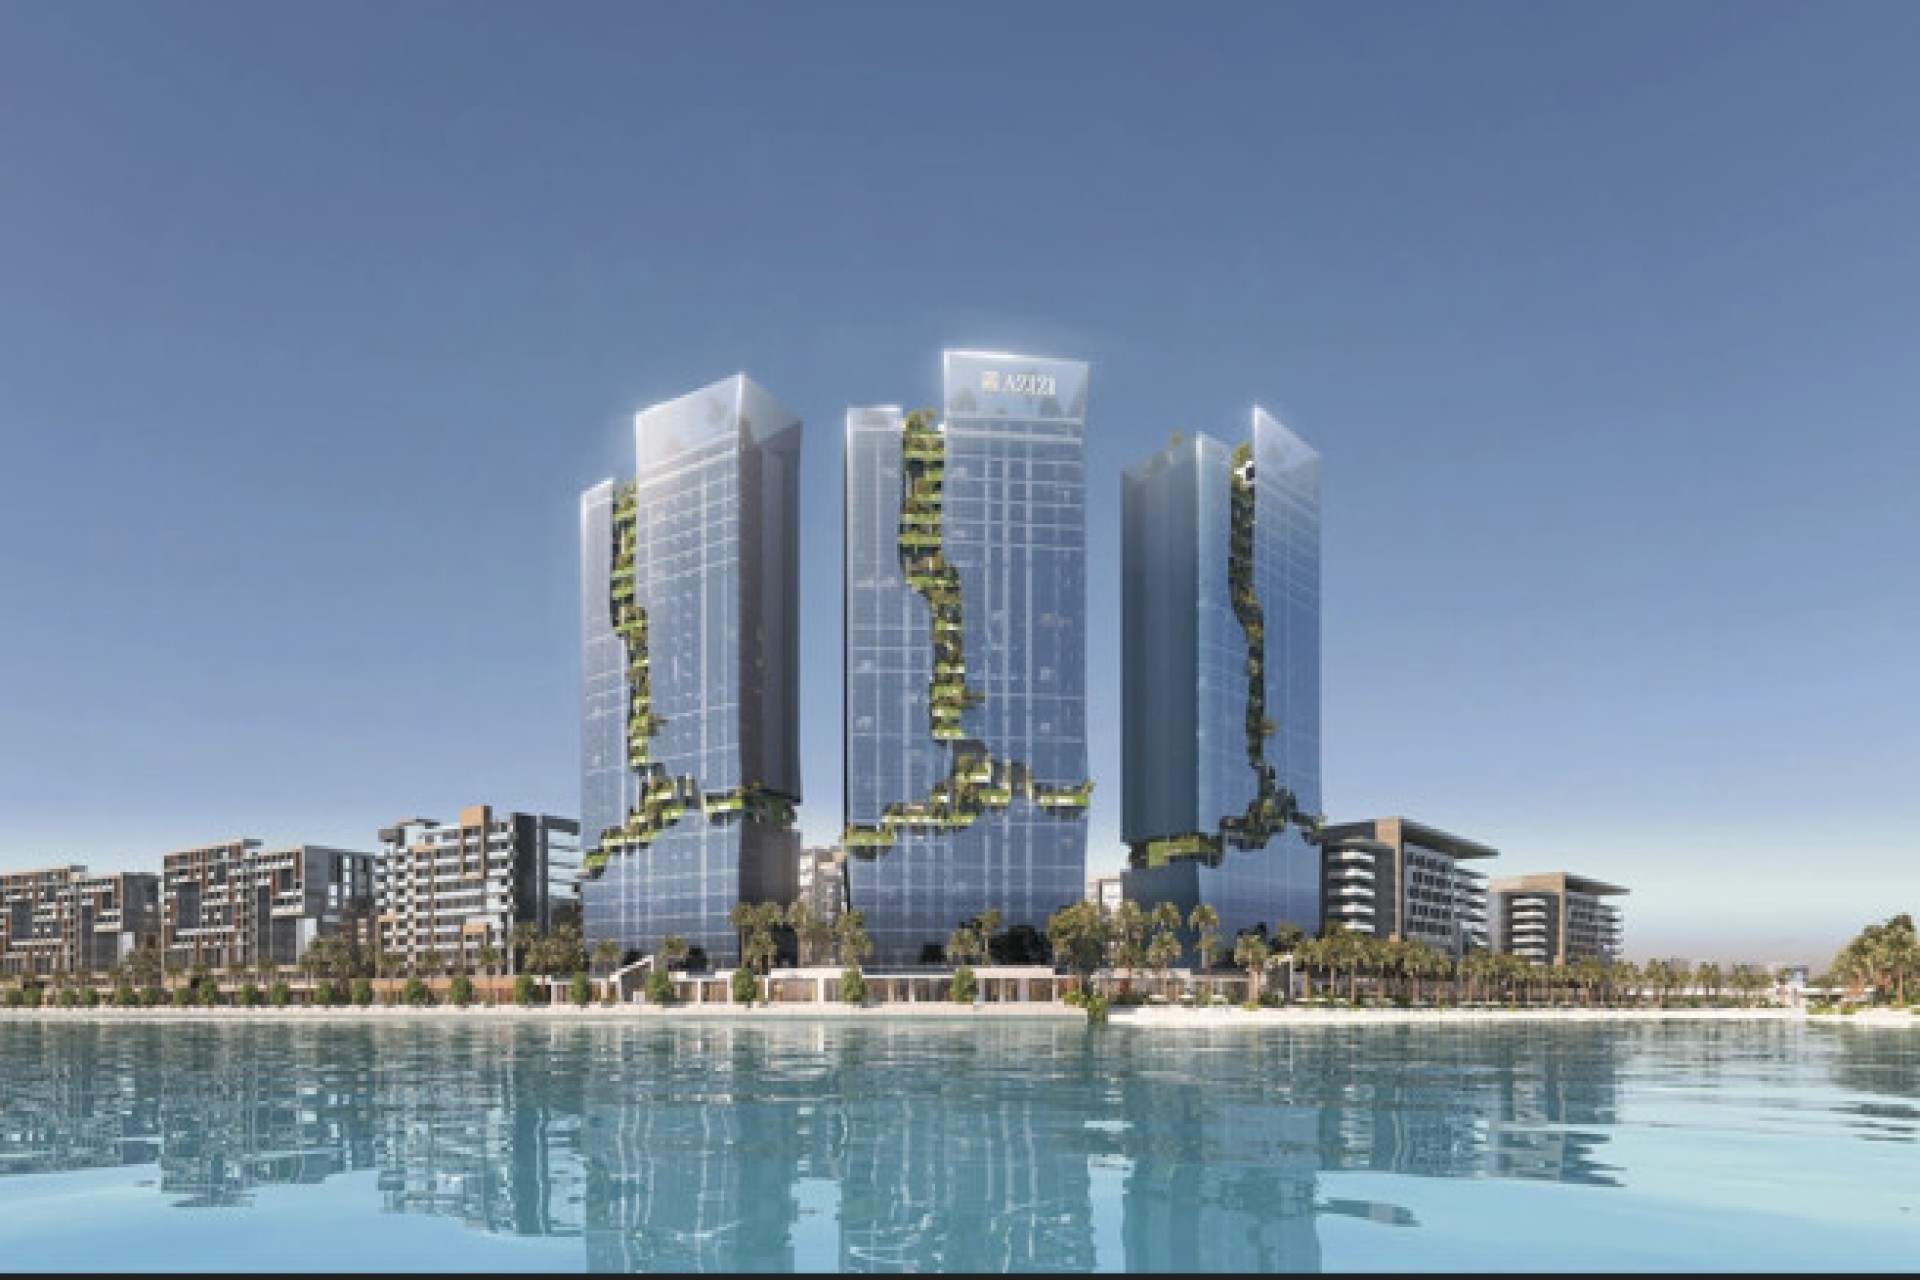 RESIDENTIAL DEVELOPMENT CONSISTING OF 69 MID-RISE RESIDENTIAL BUILDINGS AND TWO HOTELS